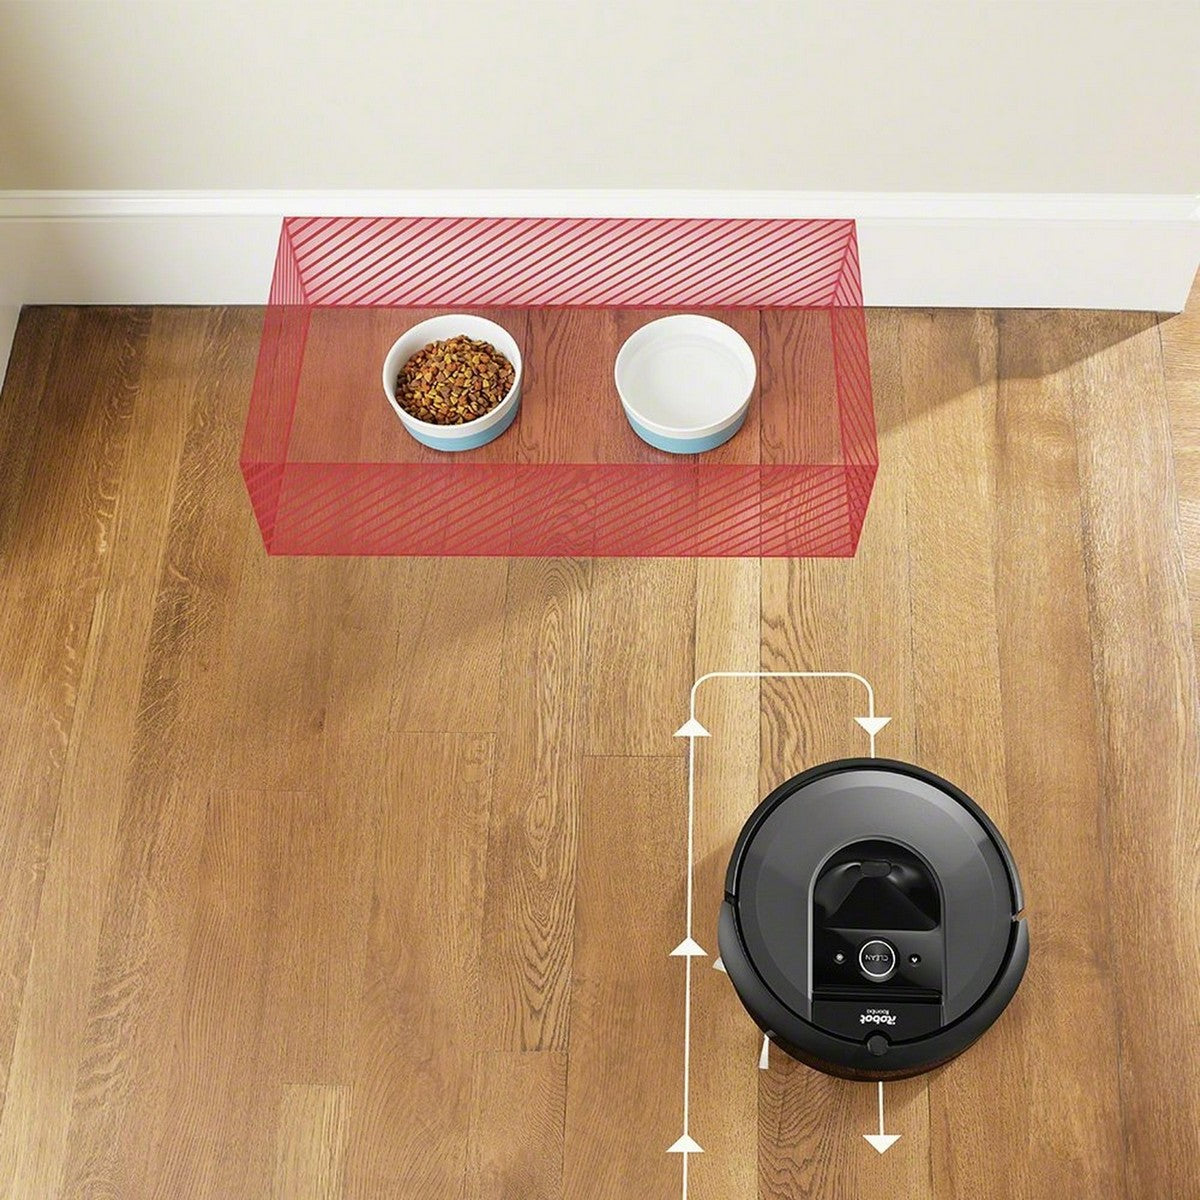 iRobot-Roomba-i7_-Self-Emptying-Robot-Vacuum-Wi-Fi-Connected-listing-banned-area